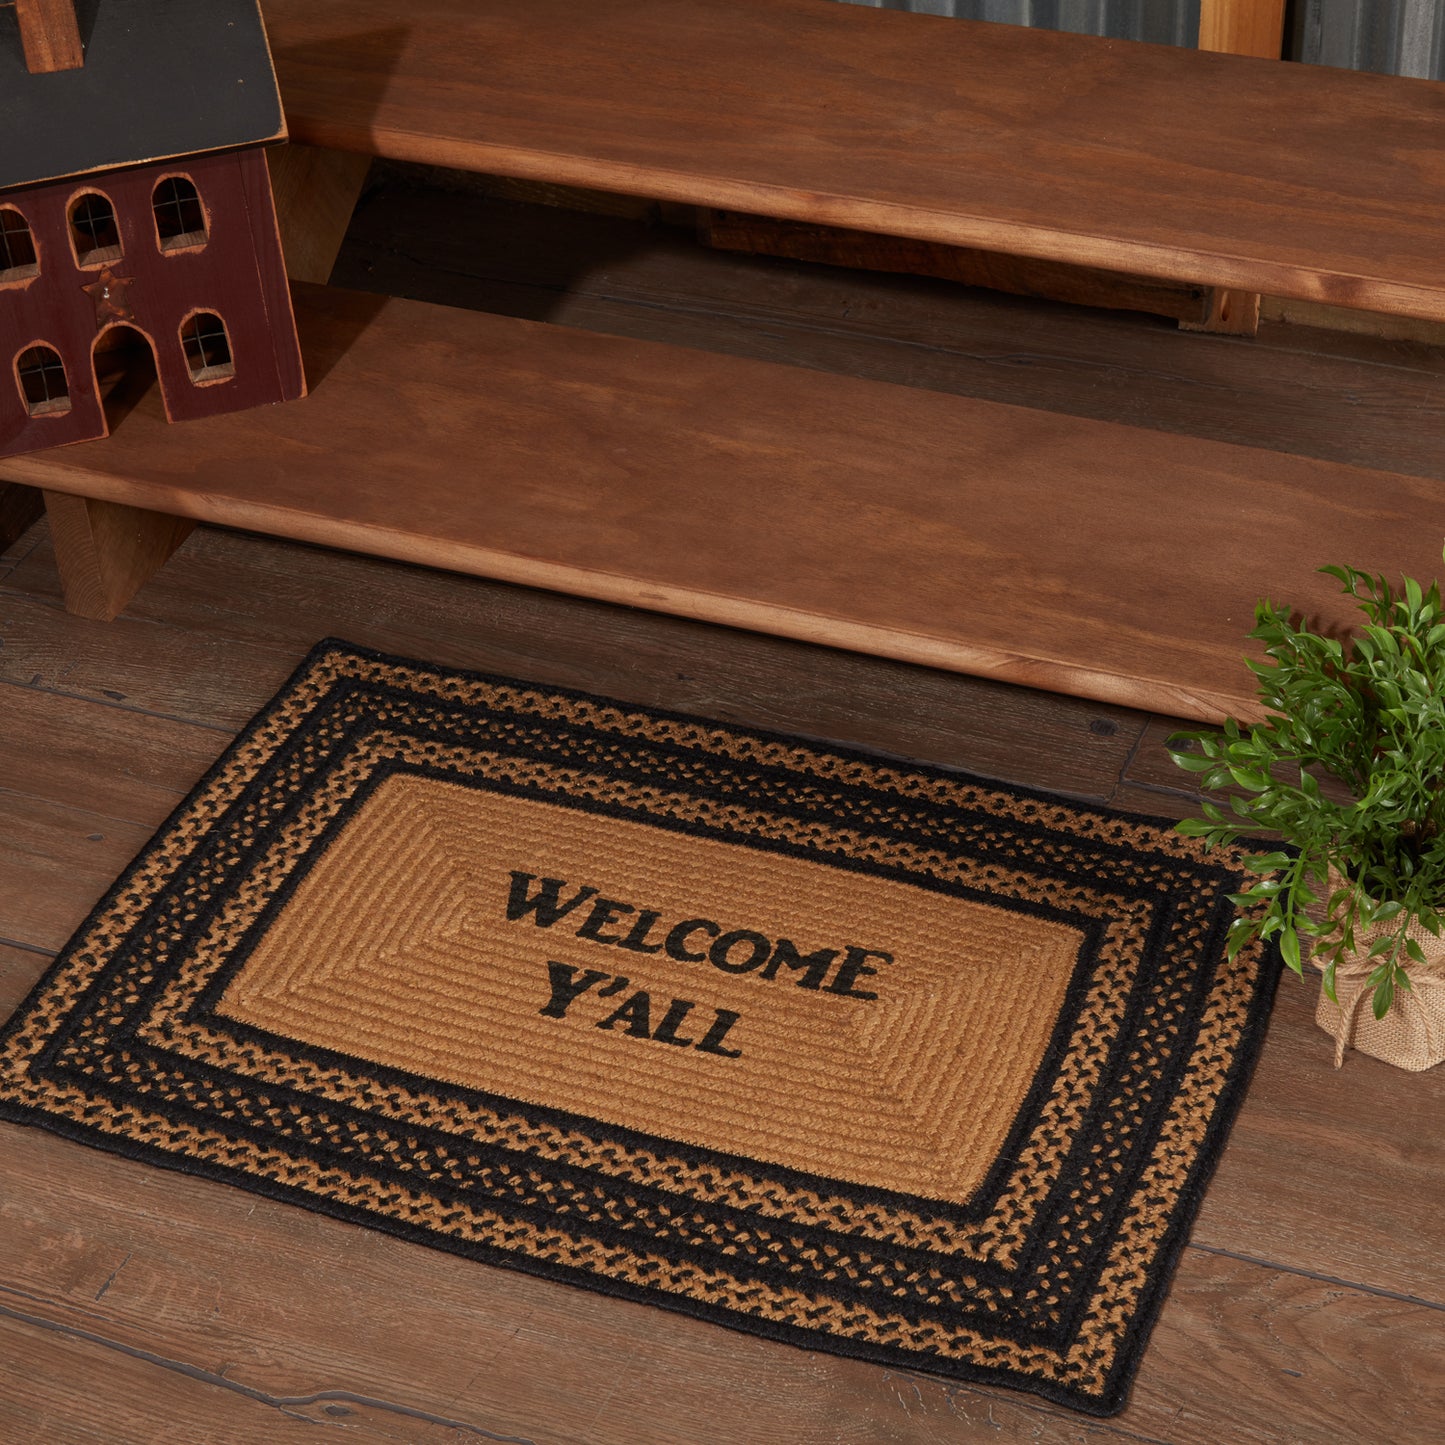 69436-Farmhouse-Jute-Rug-Rect-Stencil-Welcome-Y-all-w-Pad-20x30-image-5